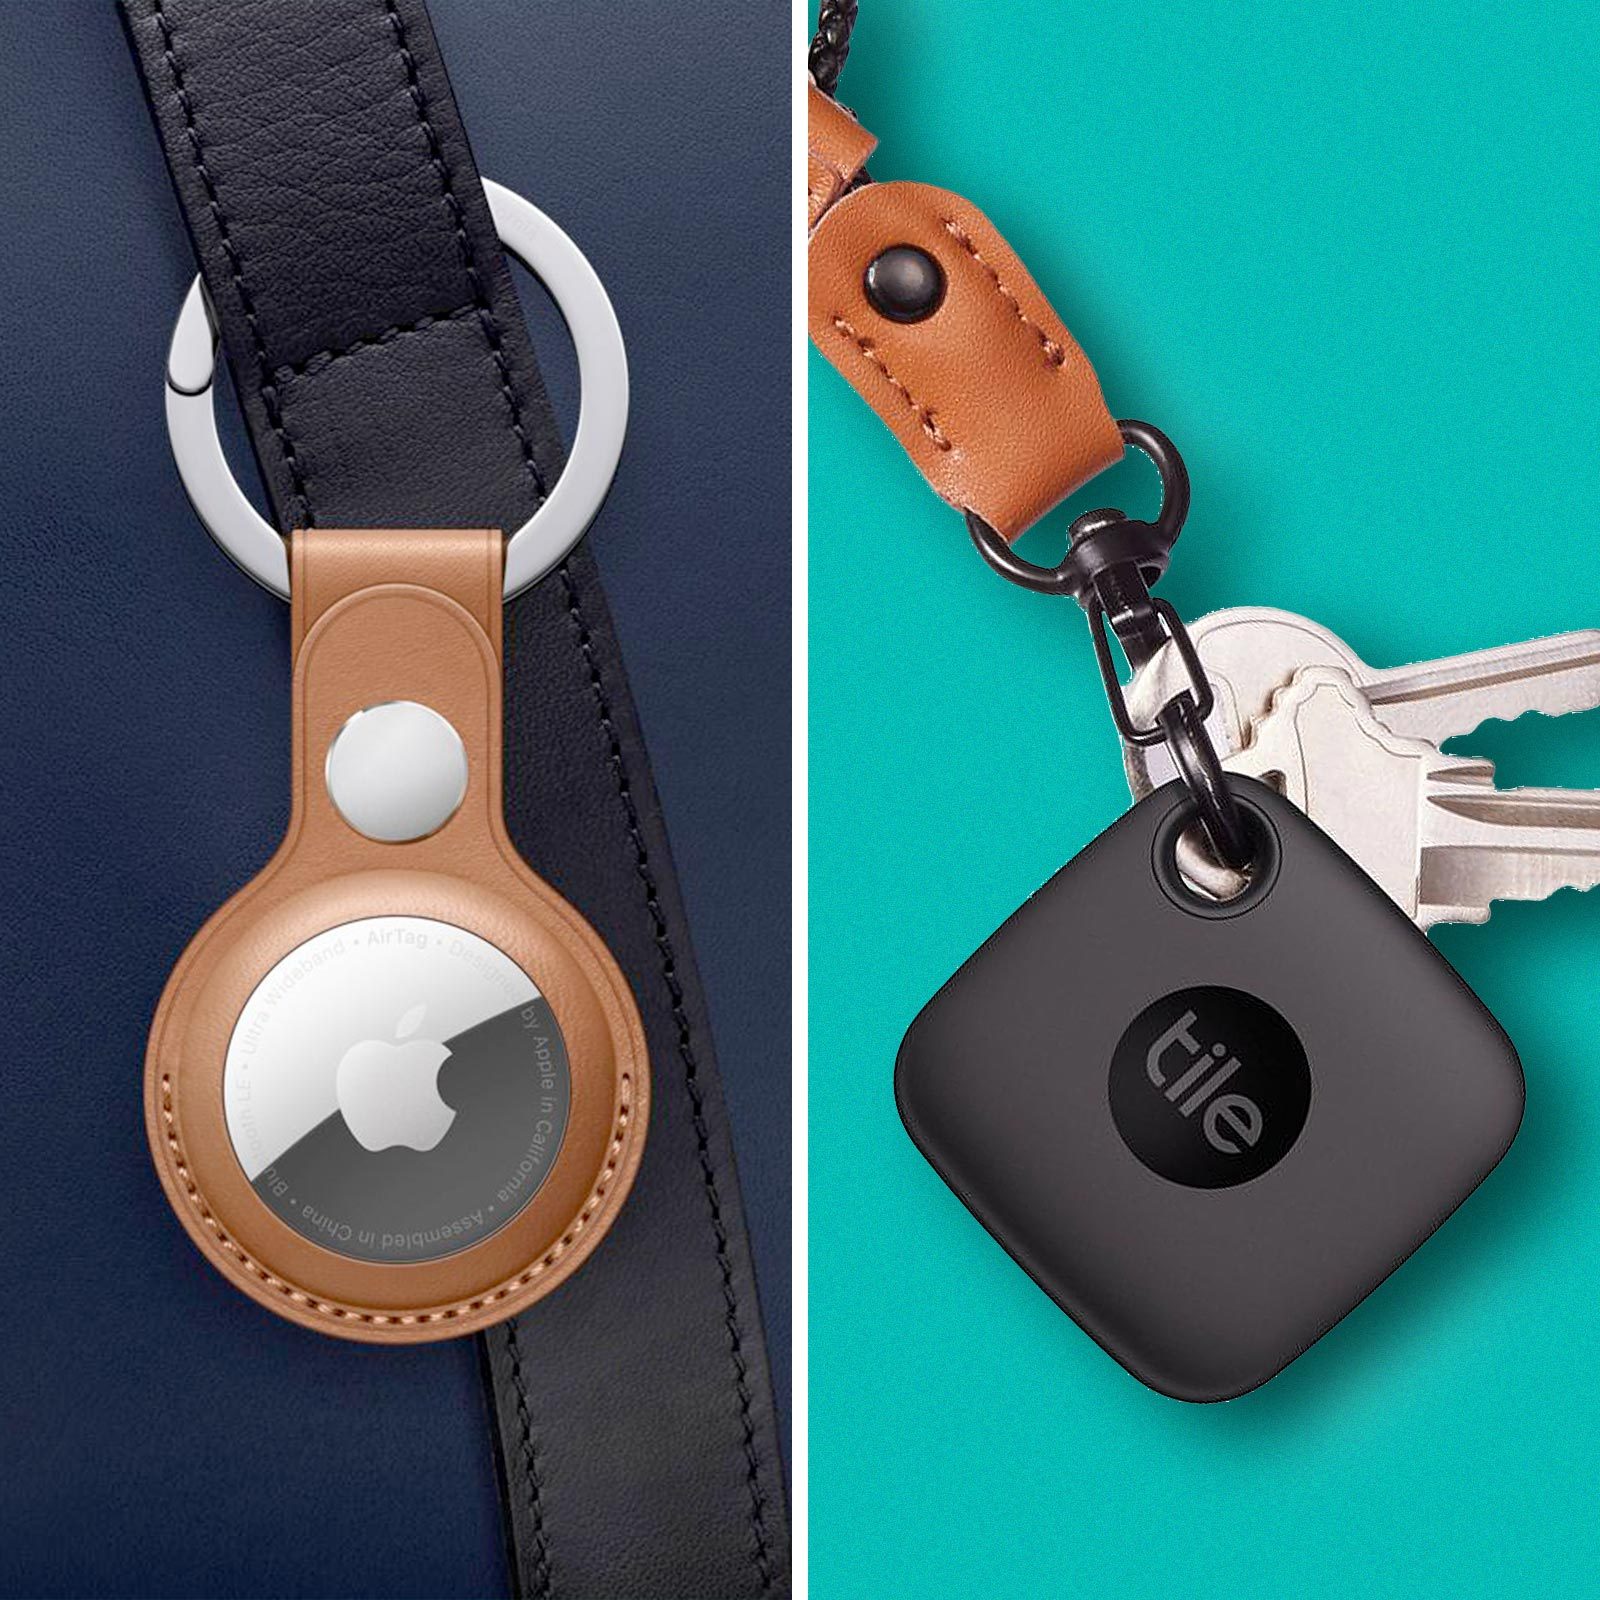 Apple AirTag vs Tile: Which Bluetooth Tracker Is the Best?